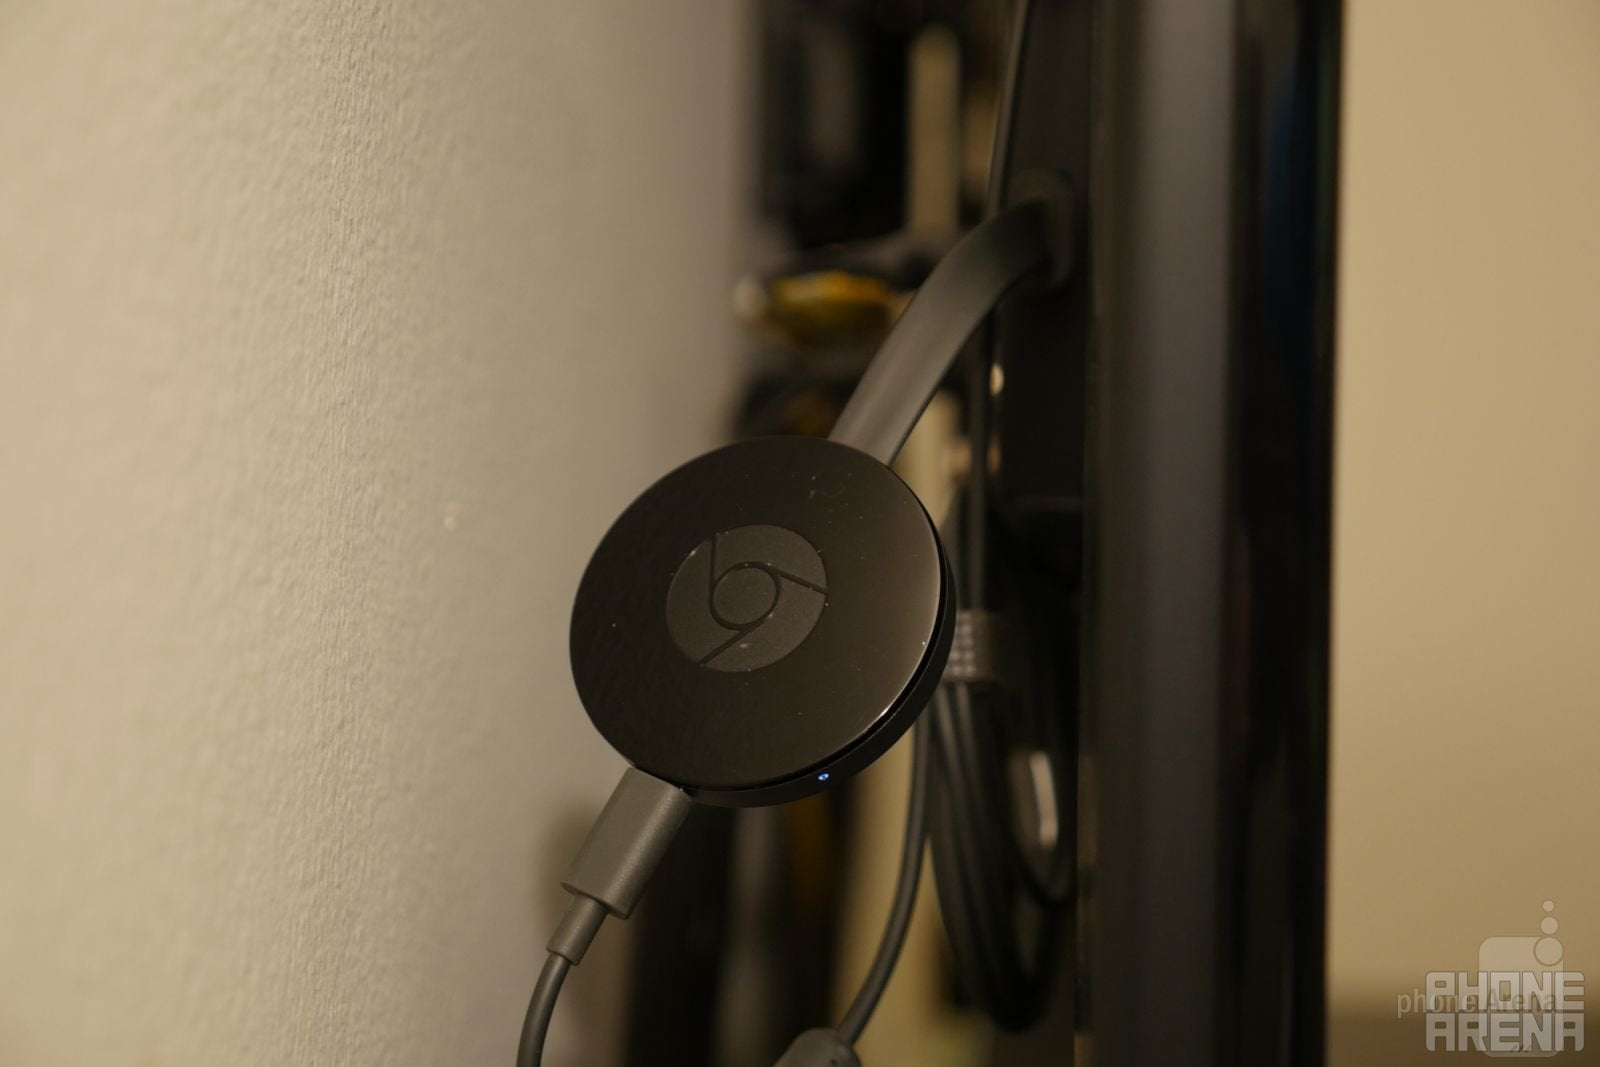 For Android smartphones, the most convenient way of connecting it to an external display is using a Google Chromecast for a wireless connection.&quot;&amp;nbsp - How to quickly turn your smartphone into a desktop PC